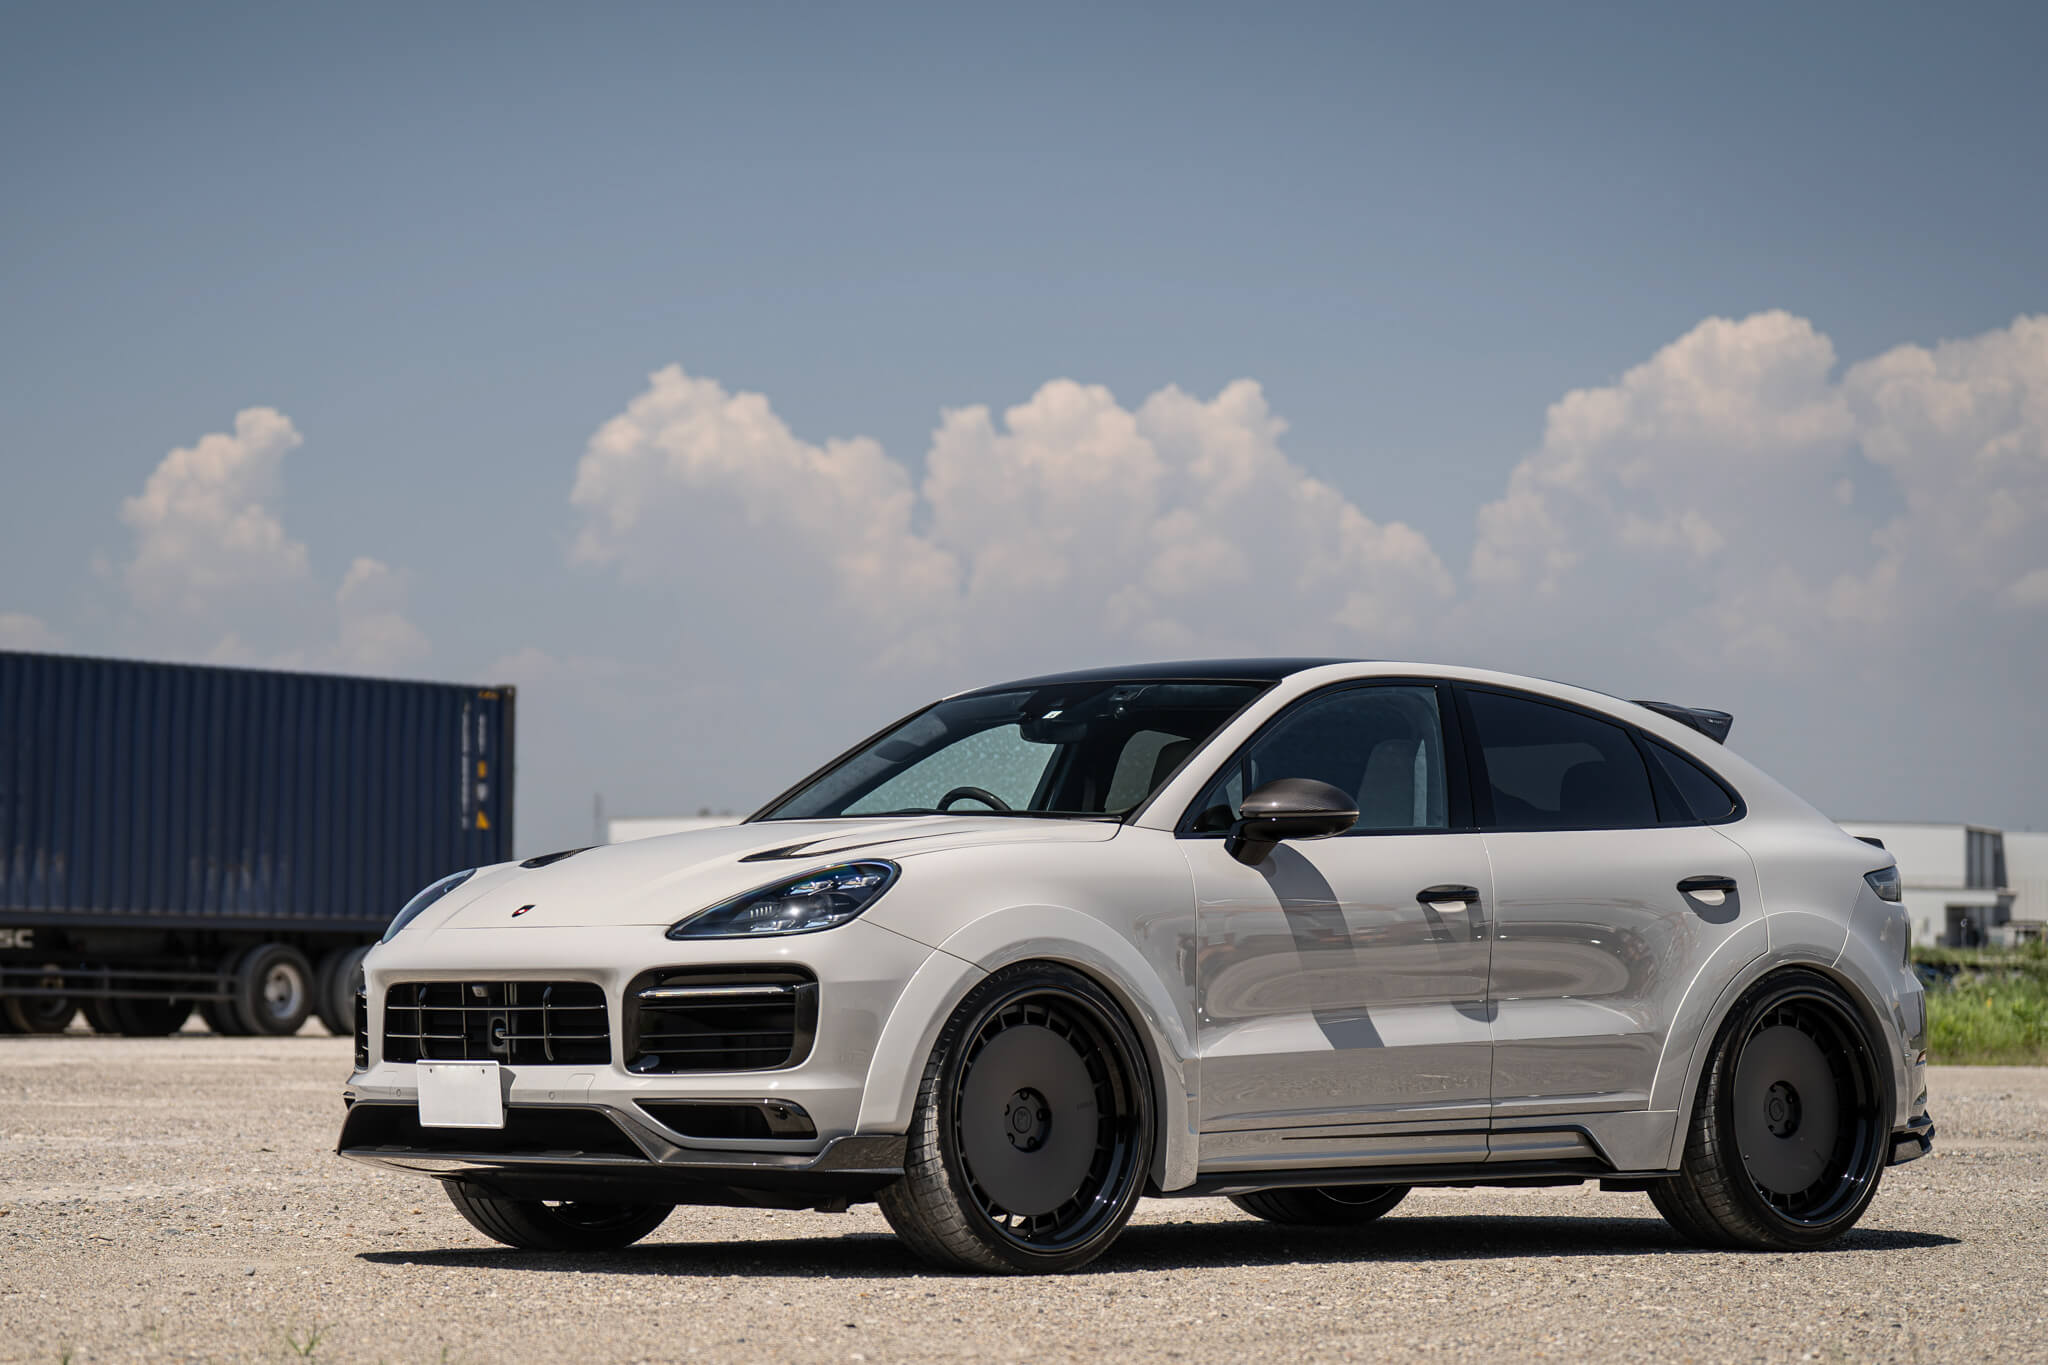 Porsche Cayenne Coupe Mansory with HRE Vintage 935 in Satin Black | Gloss Black